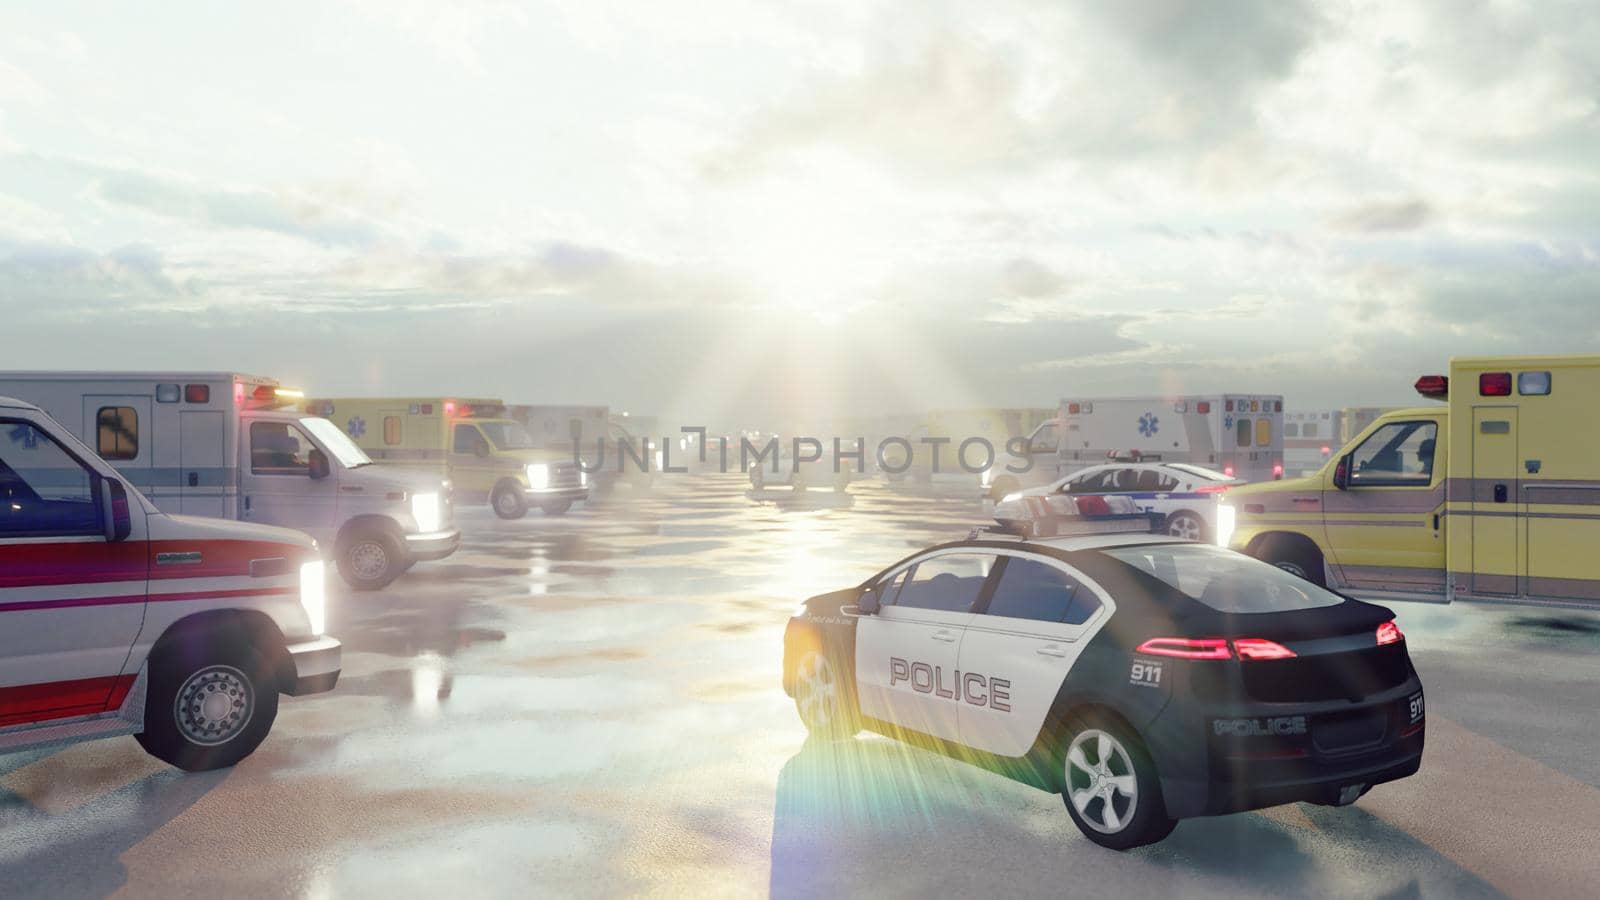 Several ambulances and police cars are waiting for the call. Concept of emergency medical and police assistance. 3D Rendering by designprojects